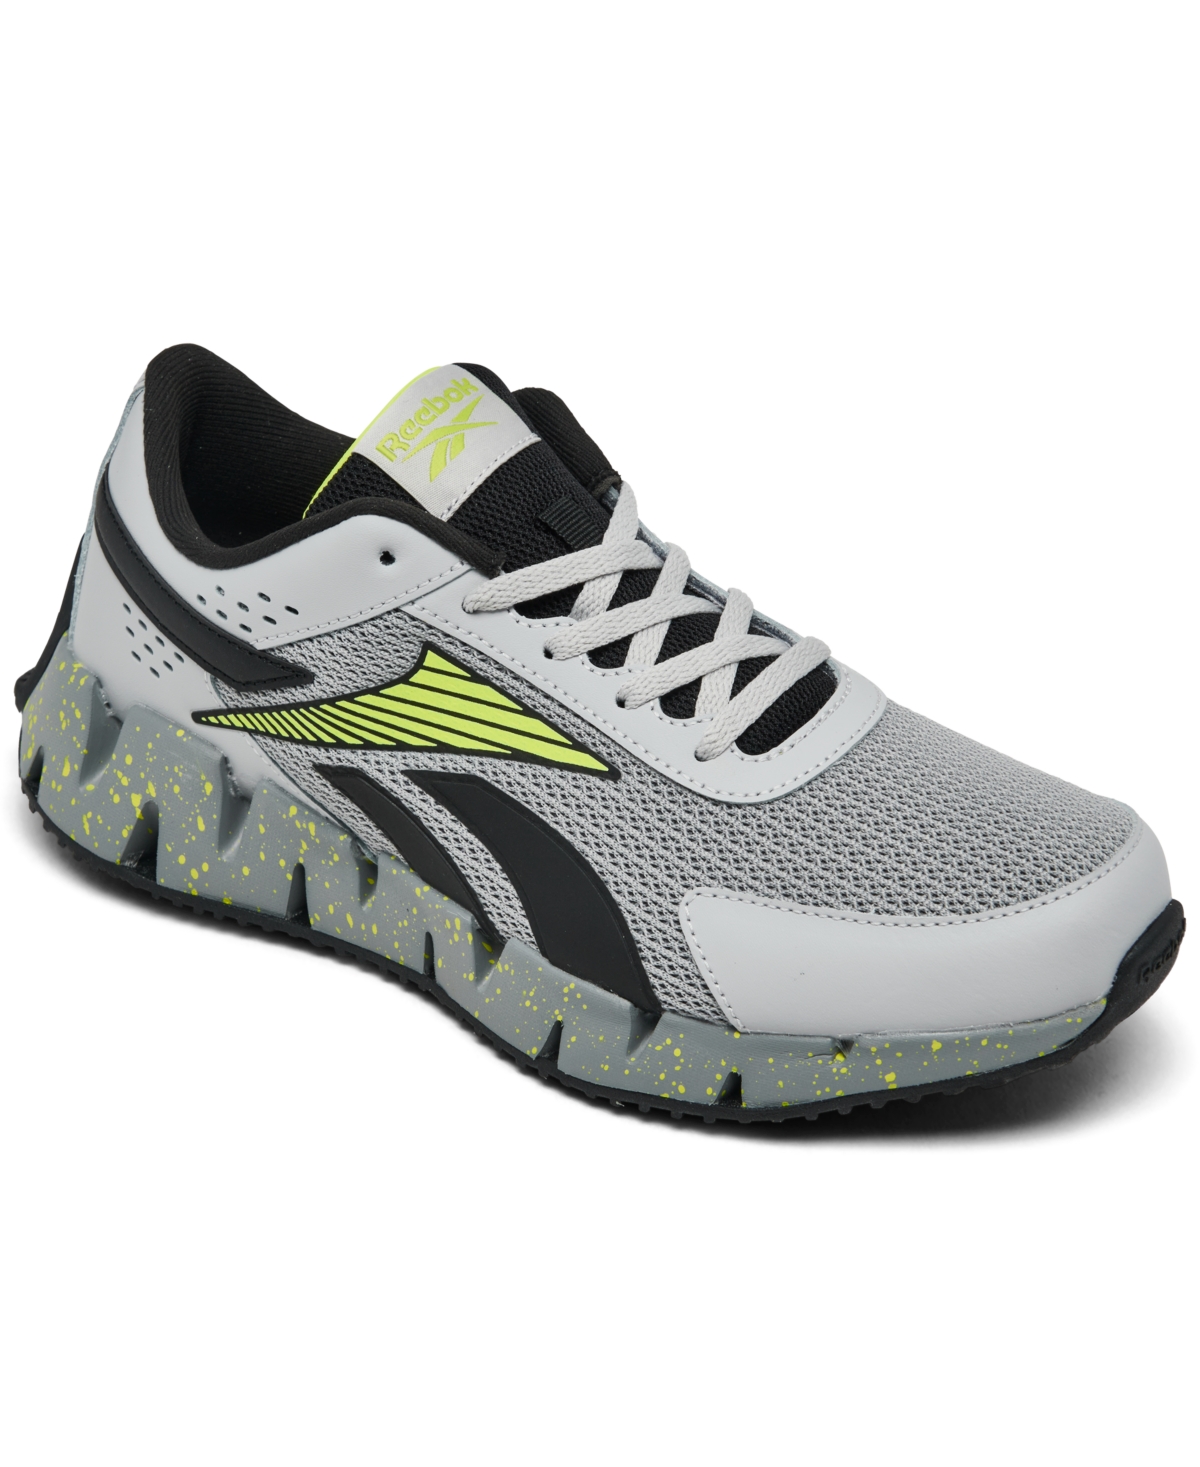 Big Kids' Zig Dynamica 2 Running Sneakers from Finish Line - Grey/Black/Neon Yellow